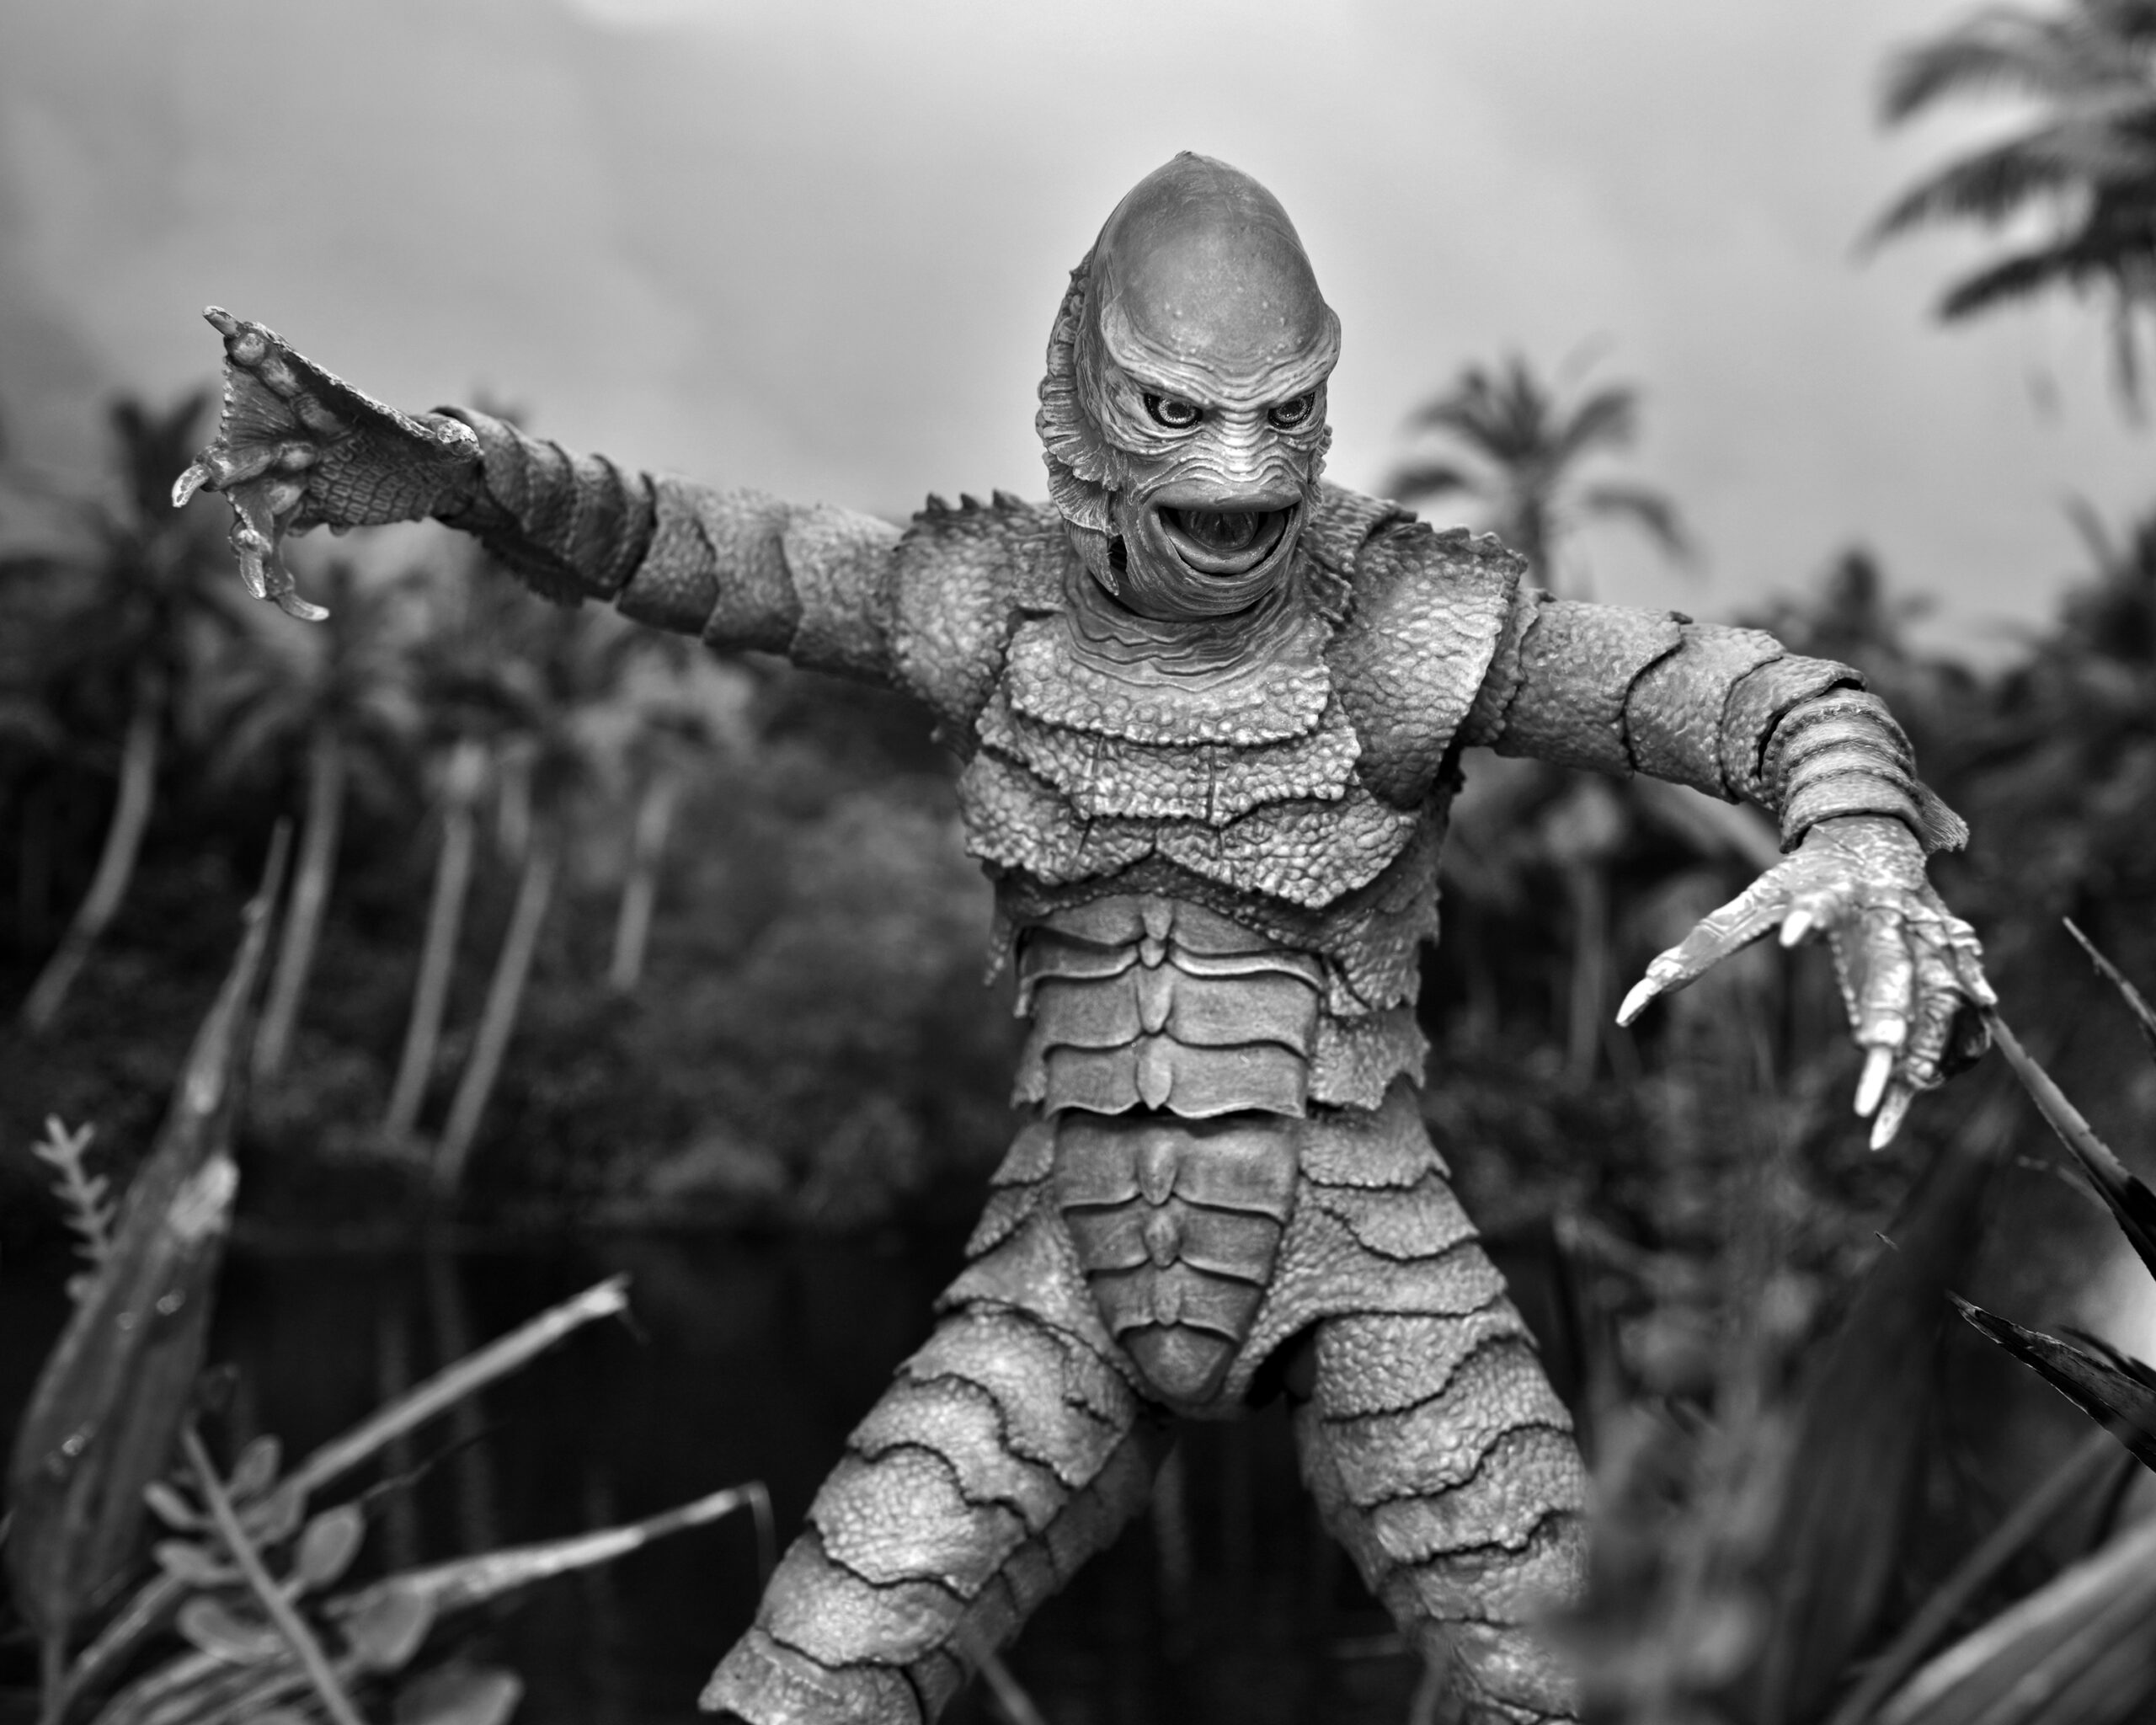 NECAOnline.com | Universal Monsters - 7” Scale Action Figure - Ultimate Creature from the Black Lagoon (B&W)